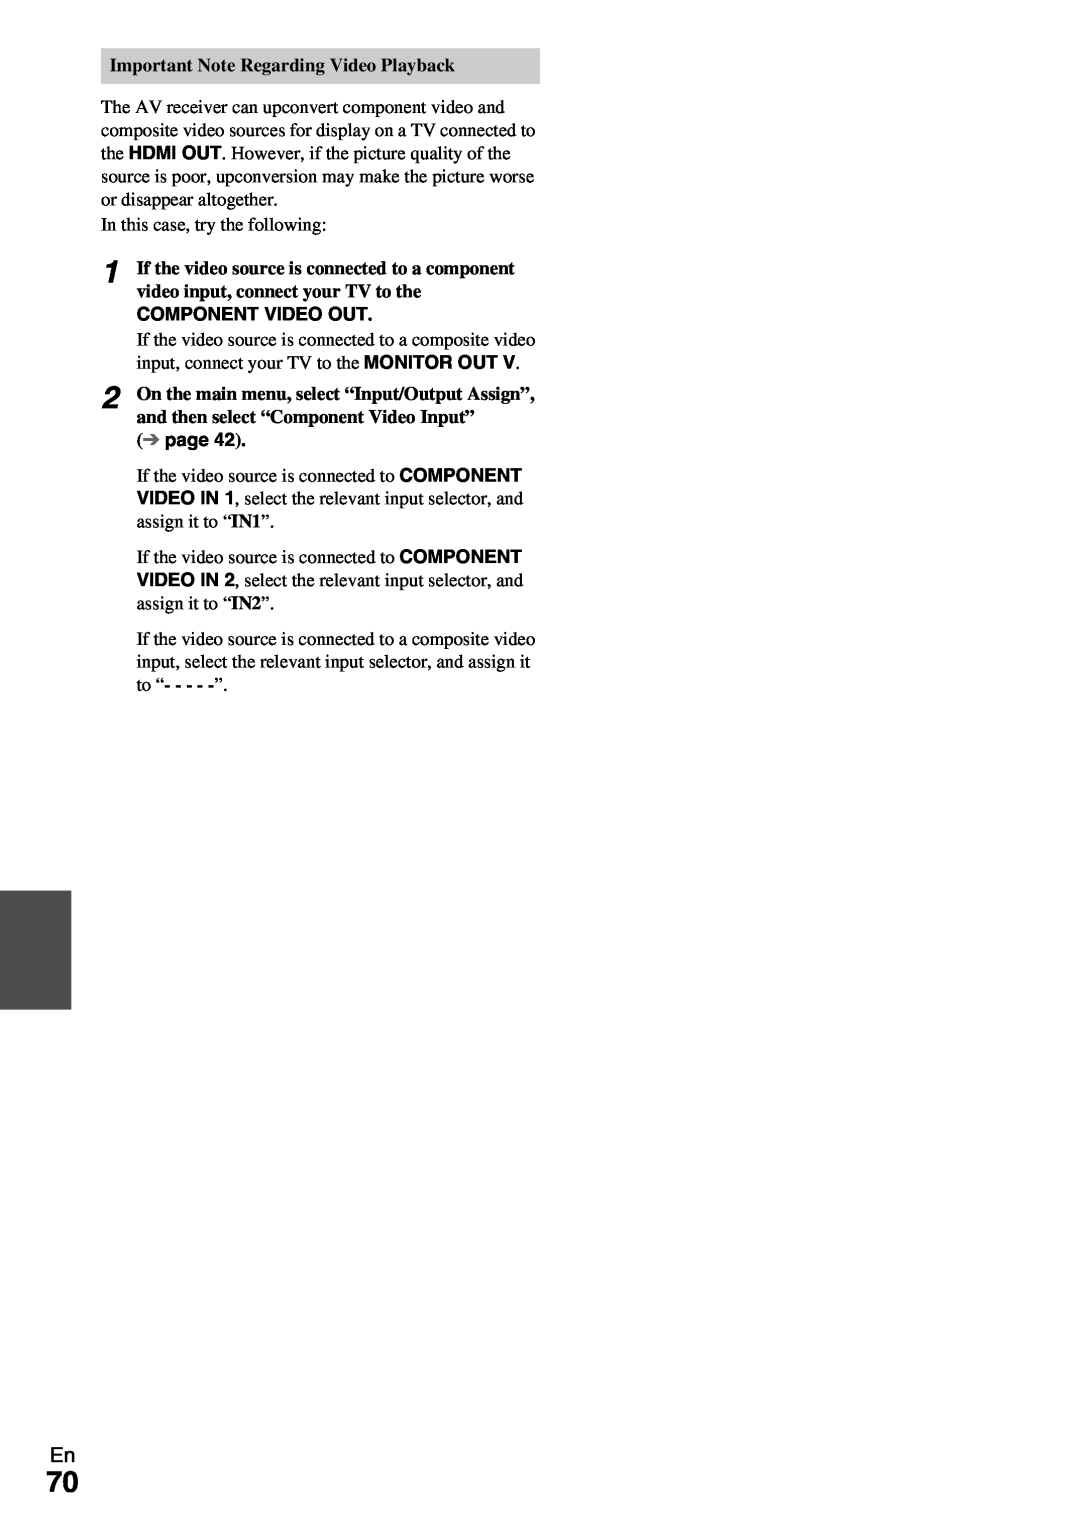 Onkyo HT-RC360 instruction manual Important Note Regarding Video Playback, Component Video Out, page 